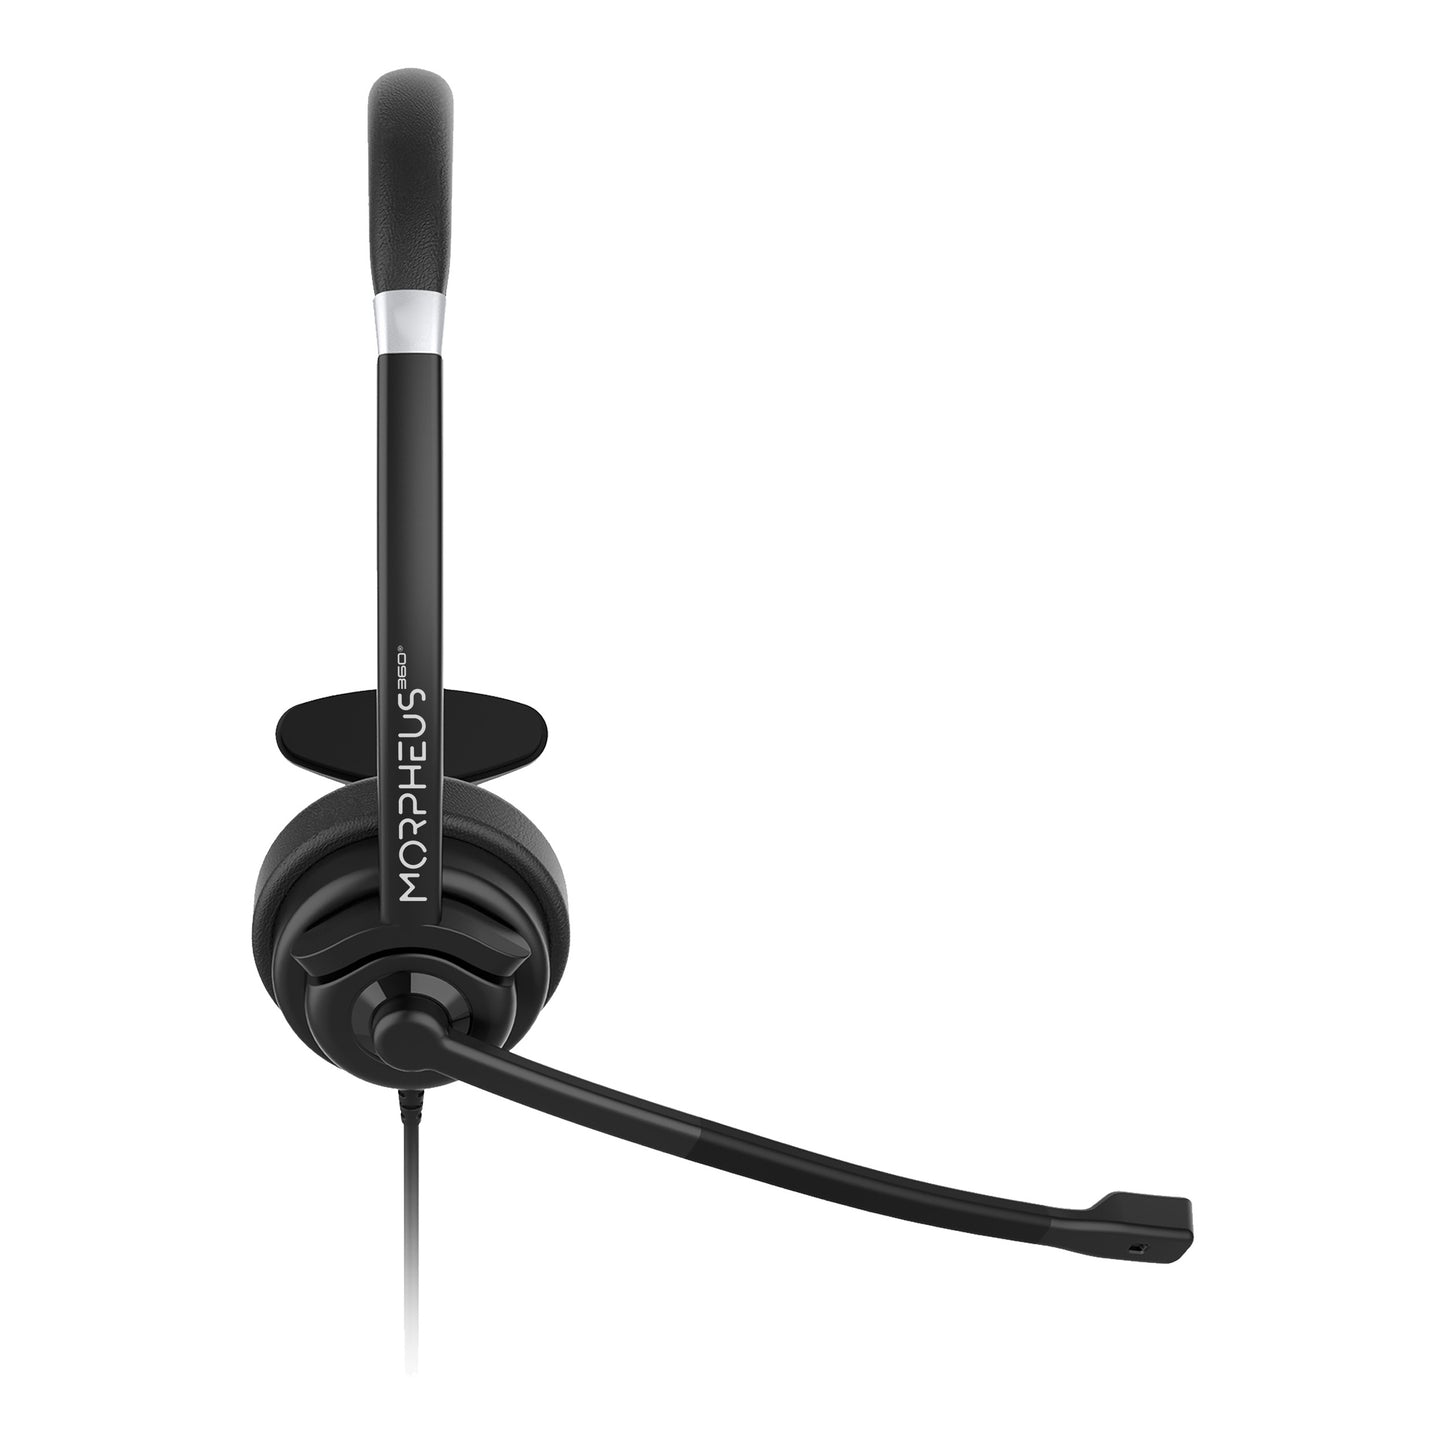 Right profile image of the Connect USB Mono Headset with Boom Microphone.